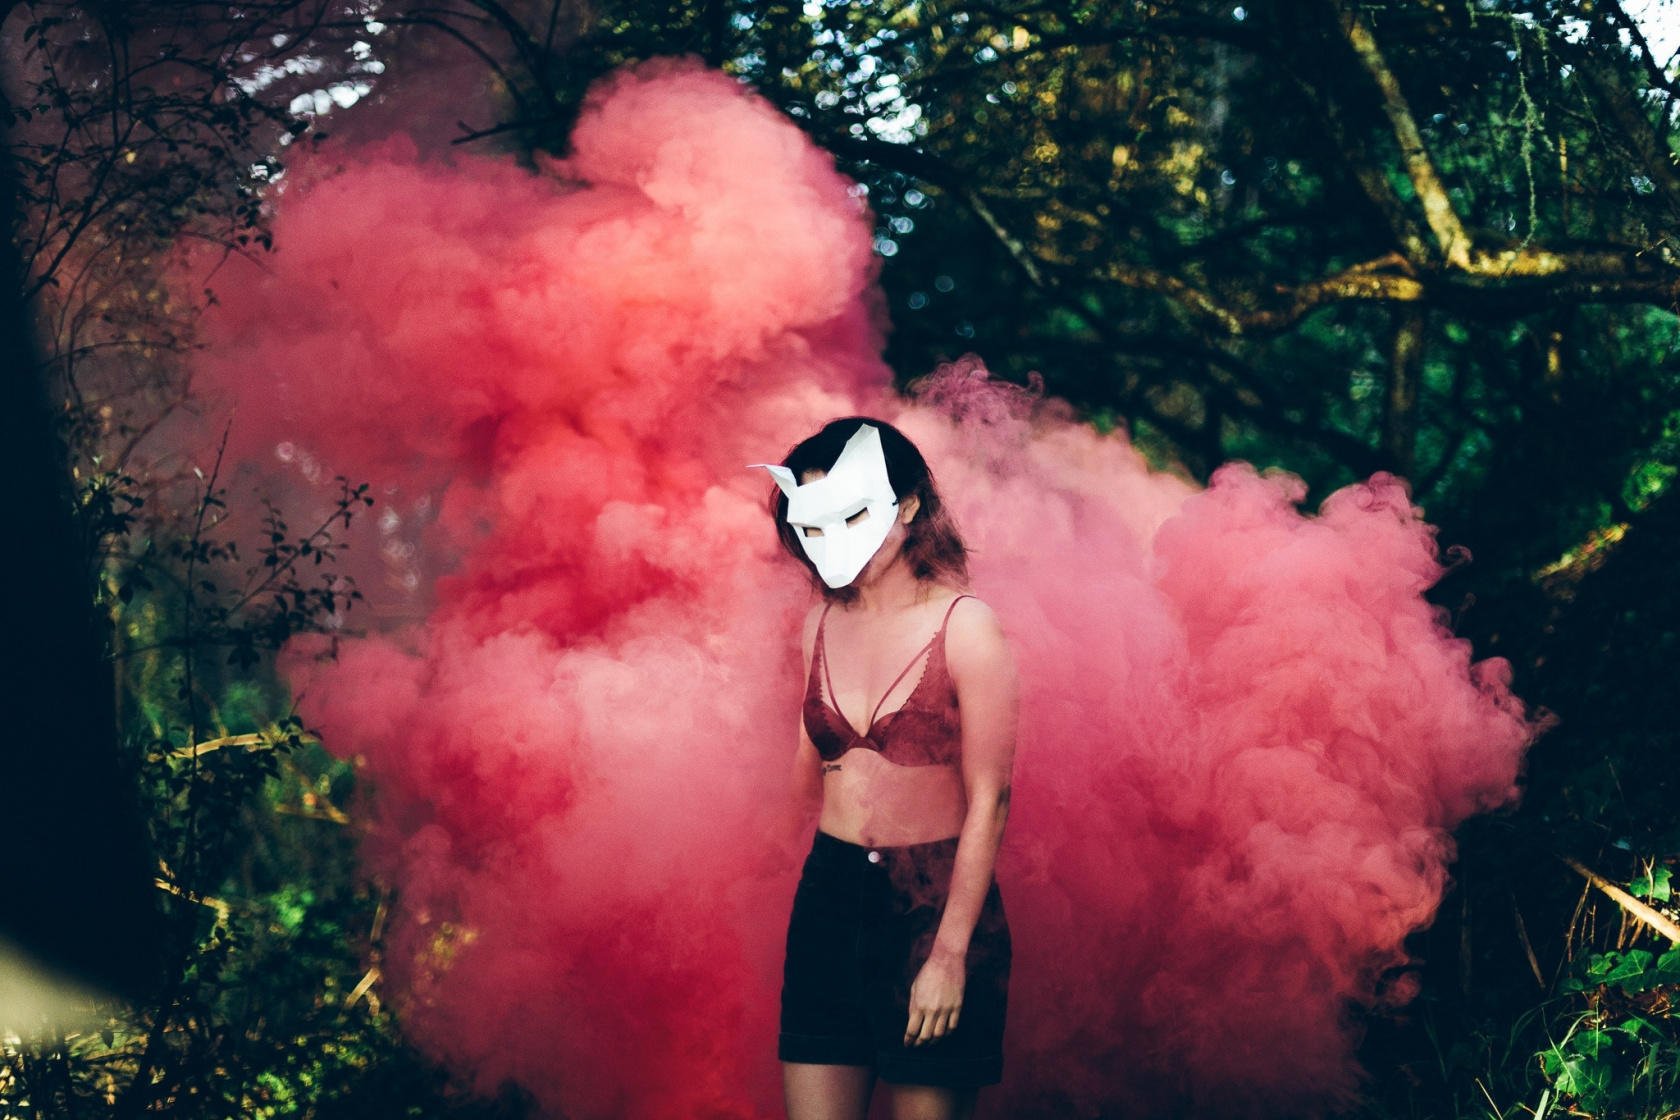 Smoke Bomb Photography You Can Master Quickly and Easily Image5